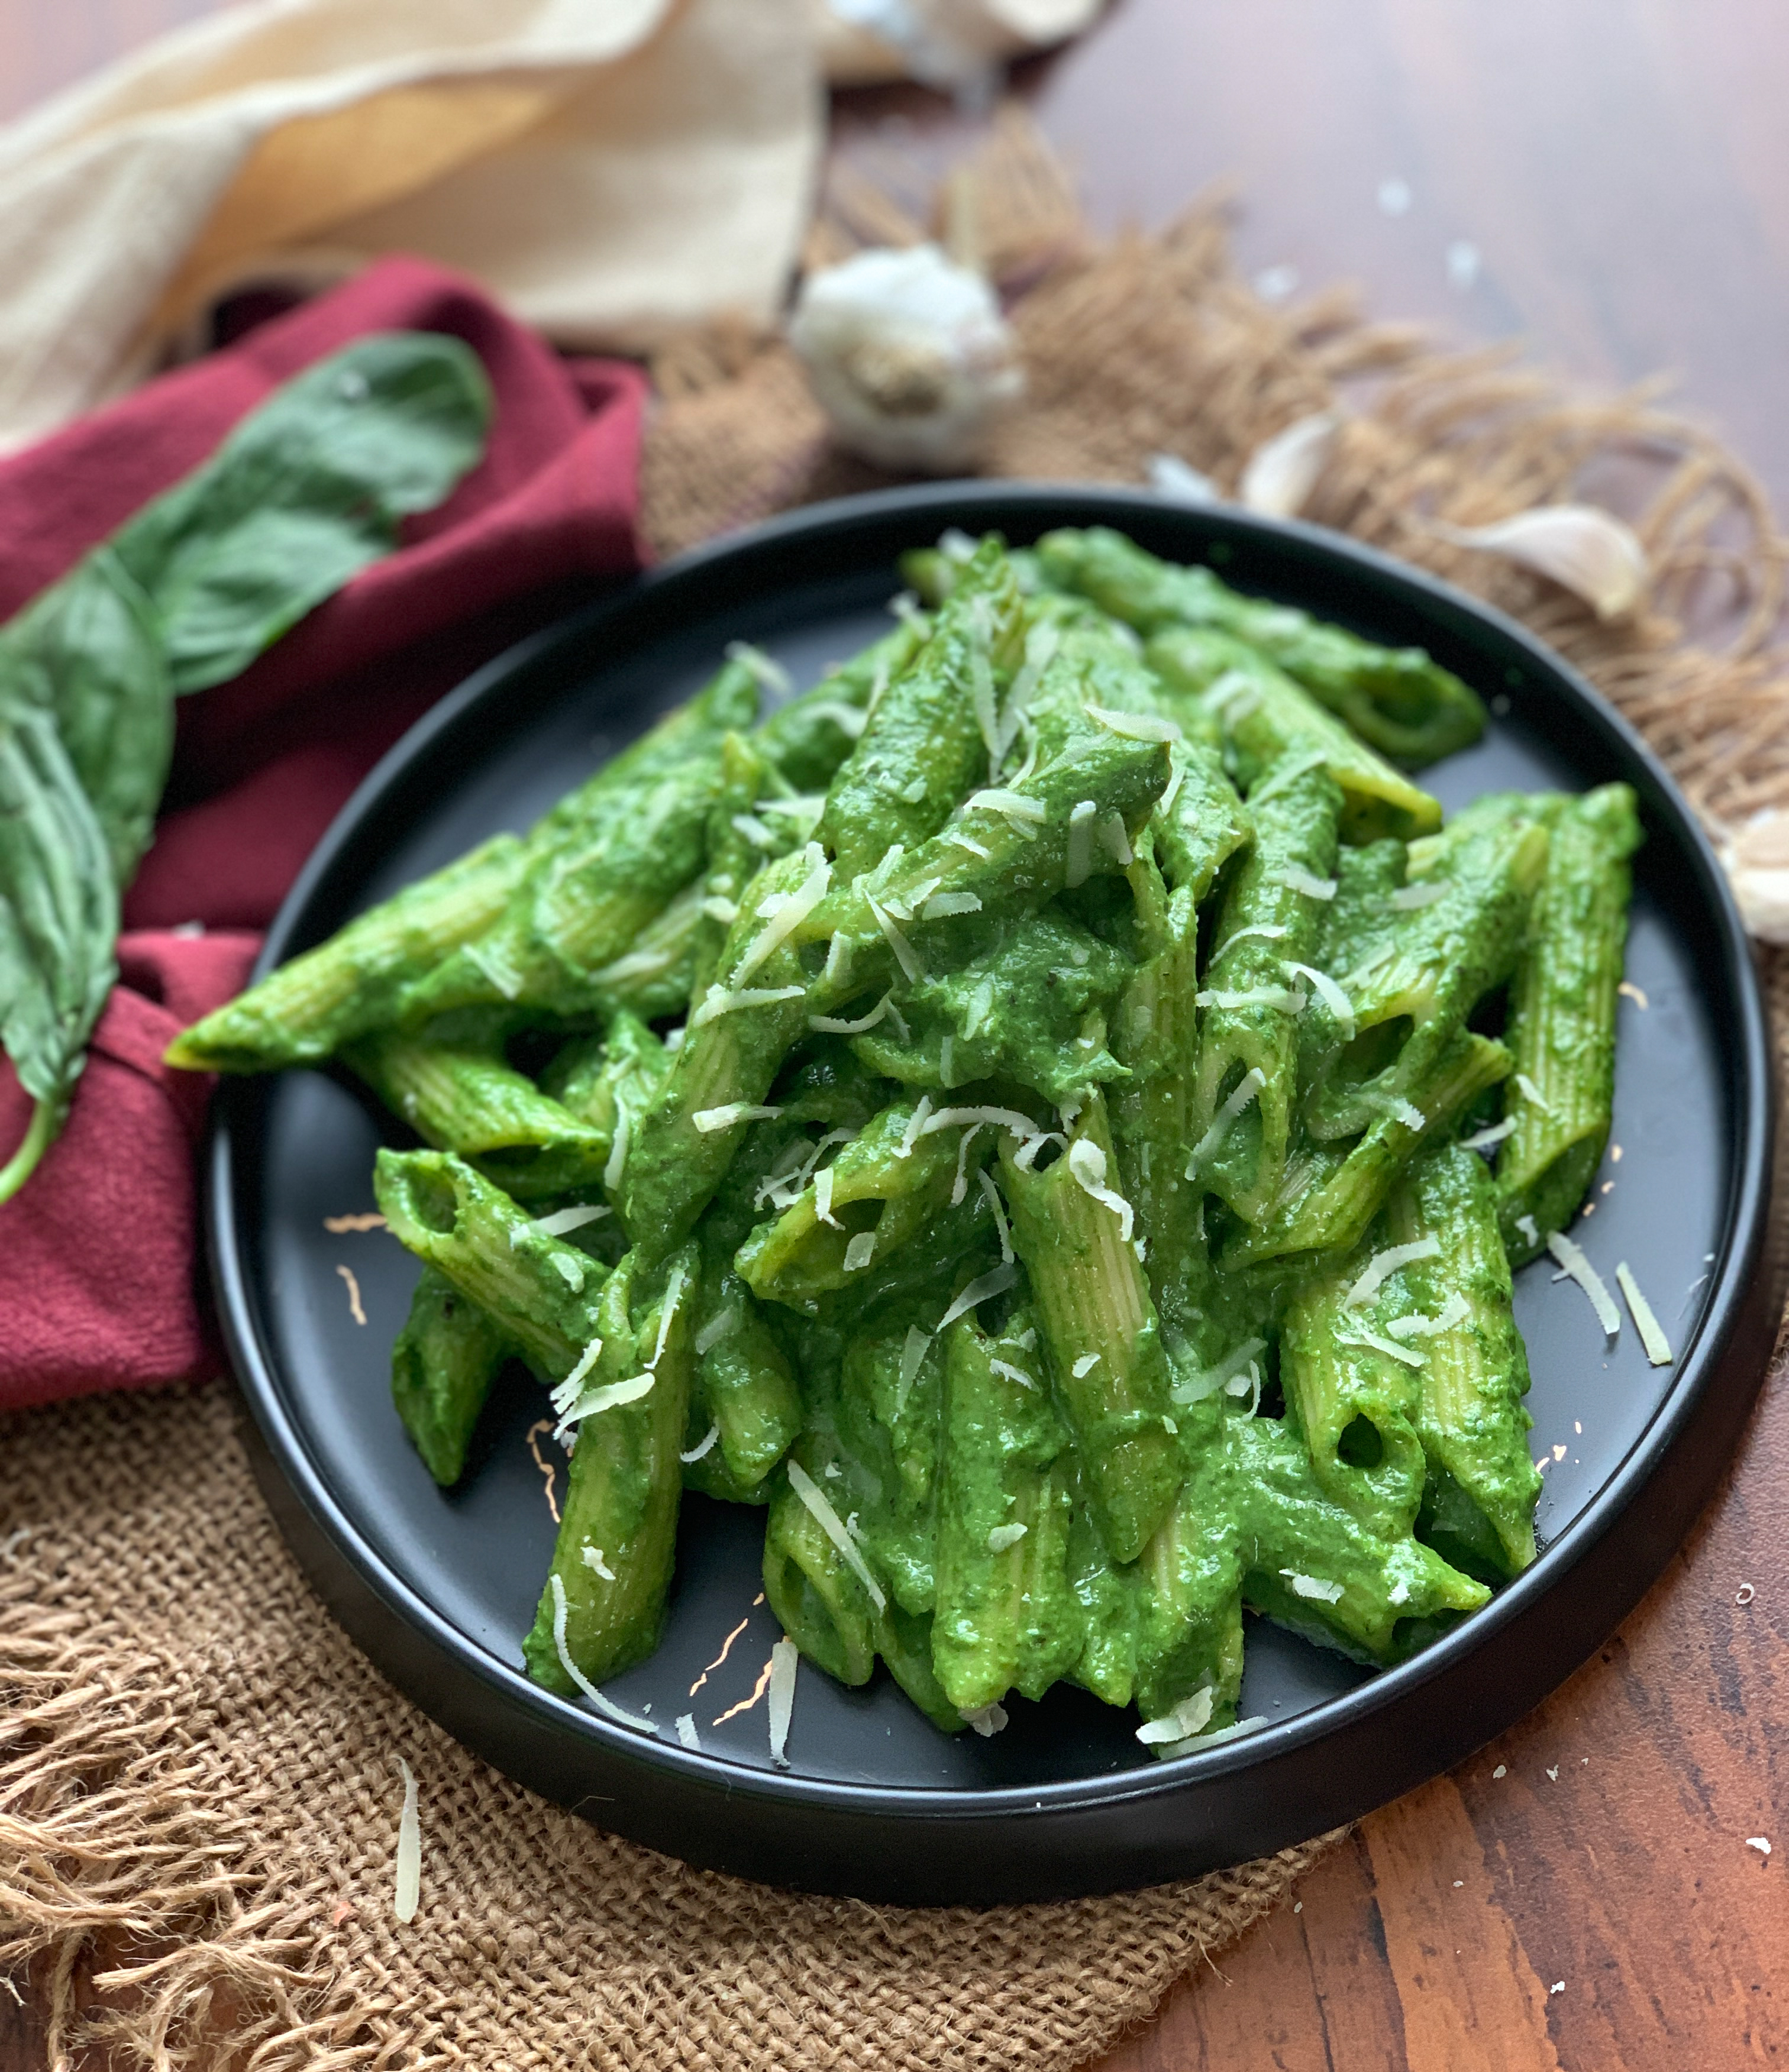 Skip the red and white sauce, ever tried green sauce pasta? This simple recipe will give you amazing taste